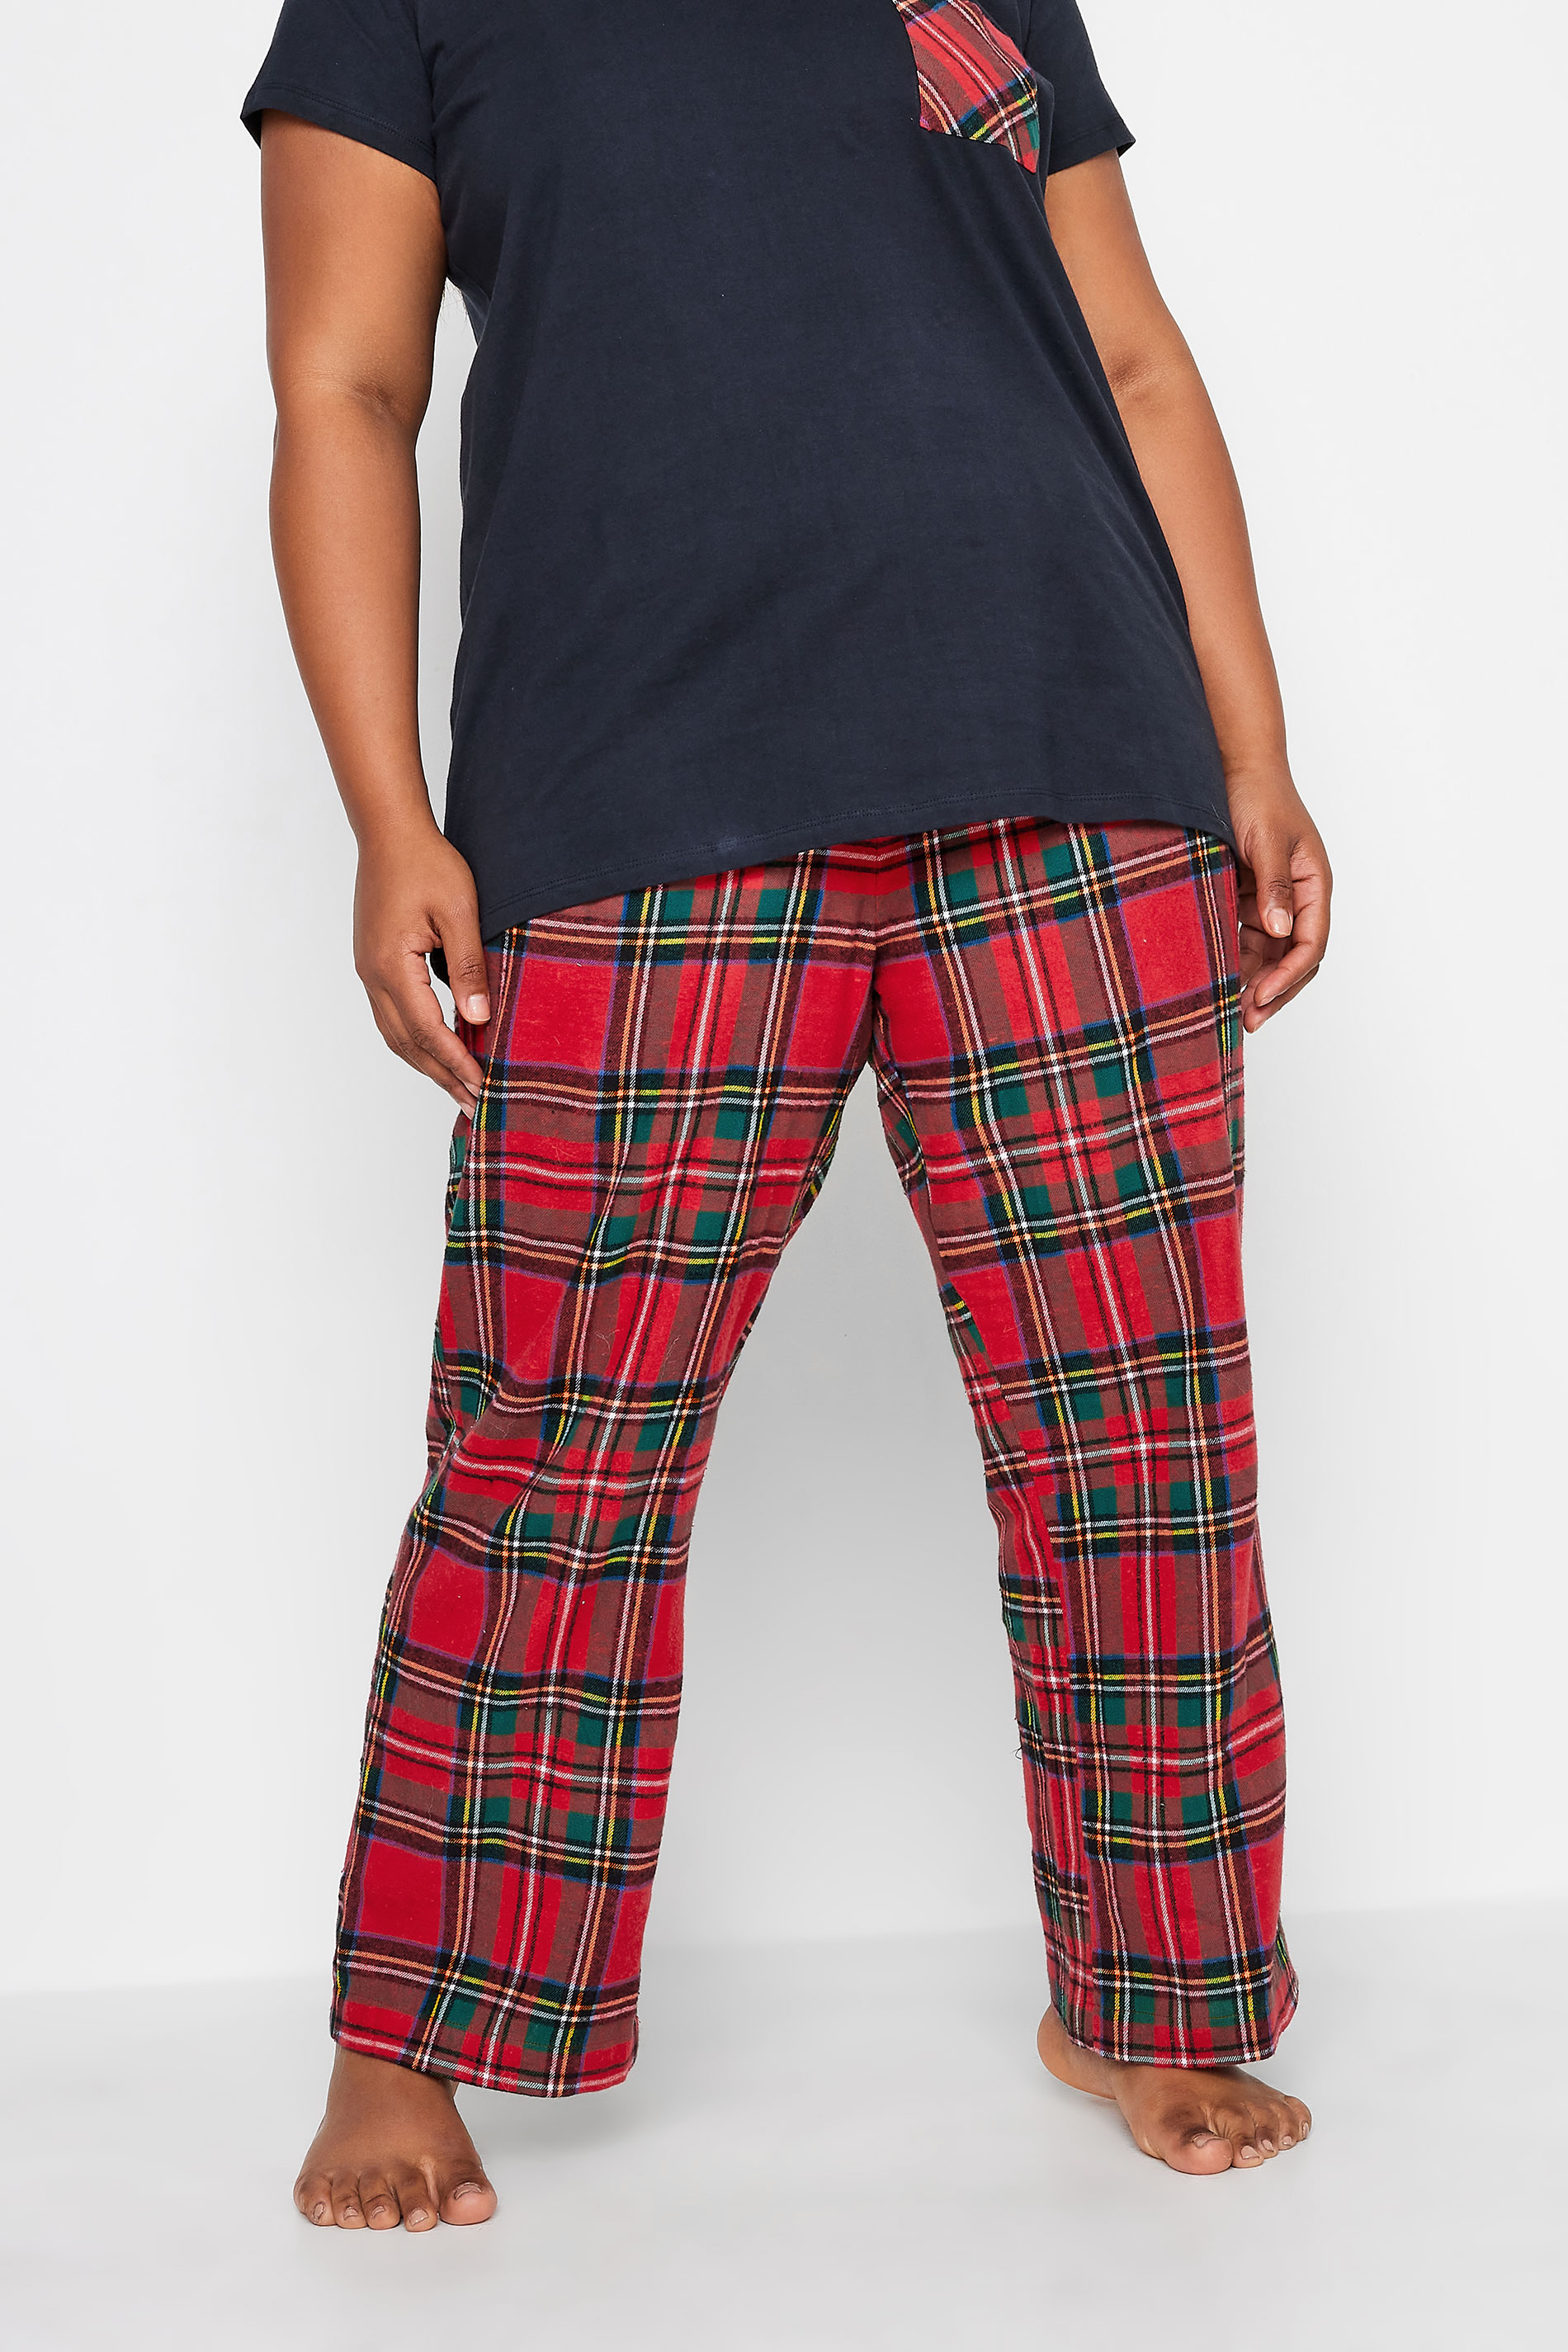 LIMITED COLLECTION Plus Size Red Tartan Check Pyjama Bottoms | Yours Clothing 3